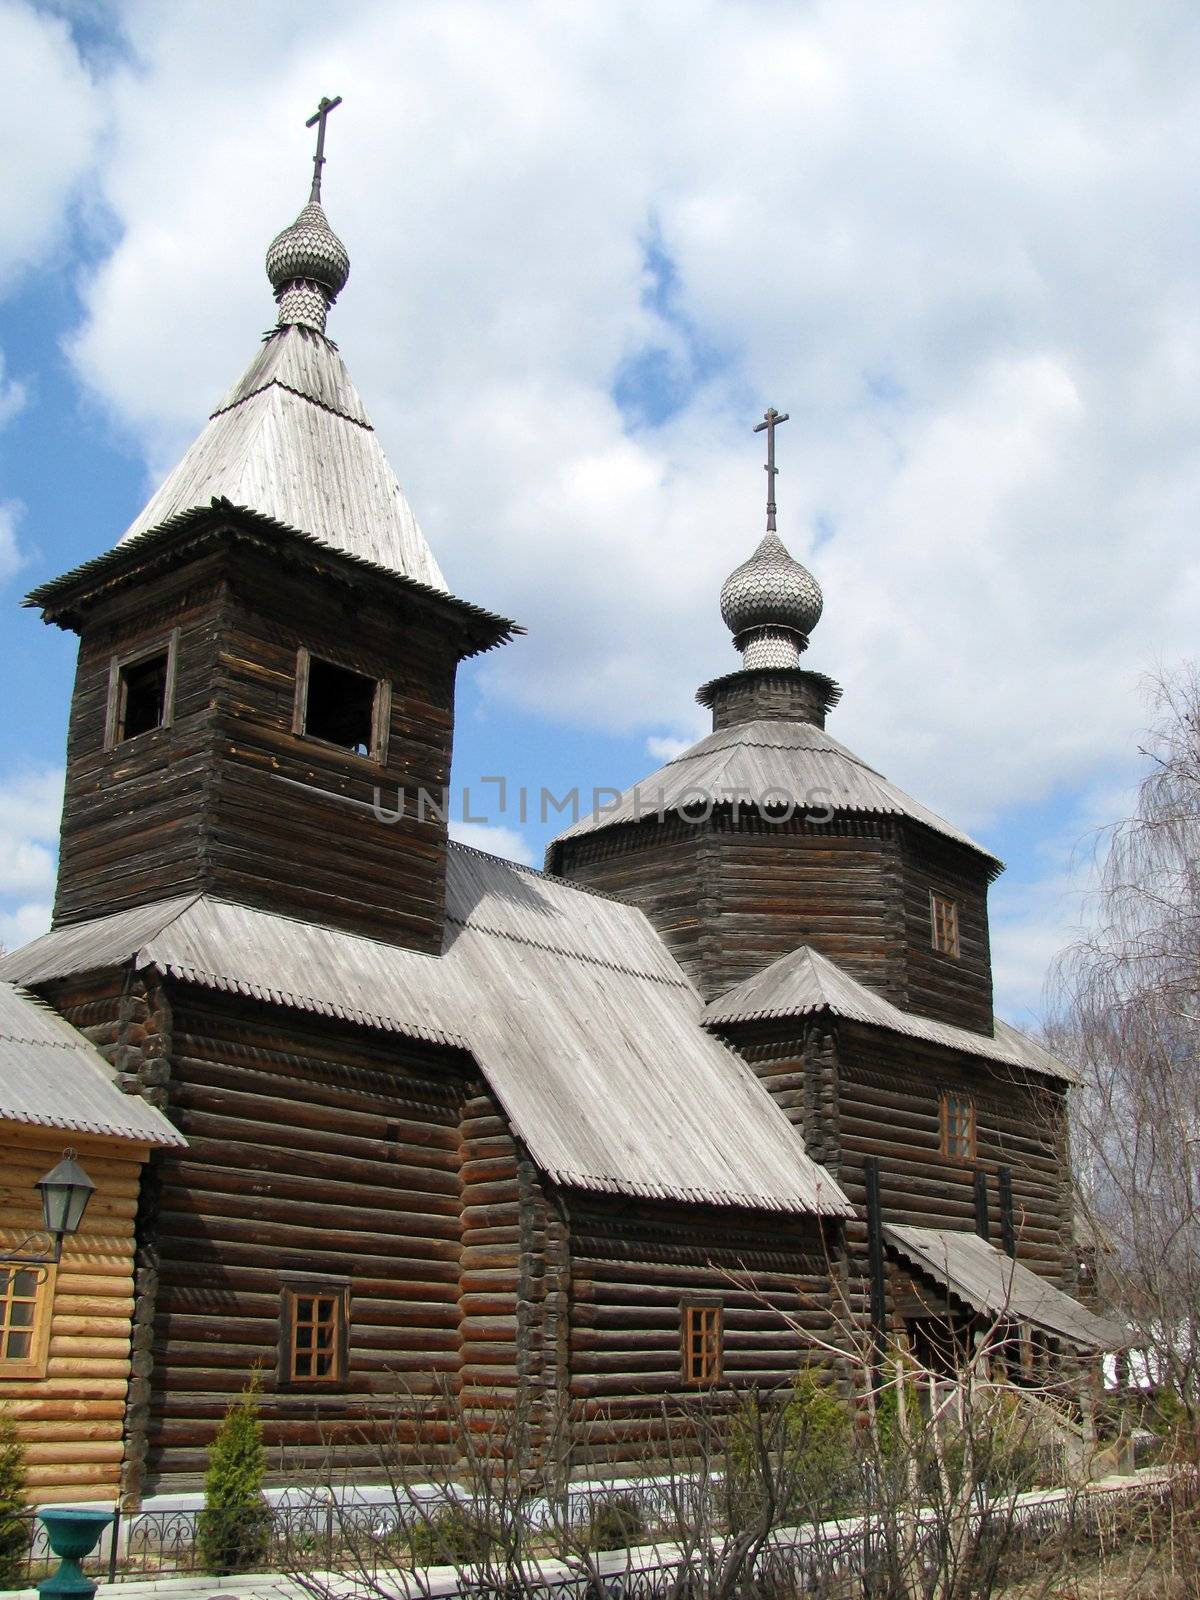 Temple, church, cathedral, religion, Orthodoxy, spirituality, domes, a cross, belief, pilgrimage, history, culture, an antiquity, Christianity, a belltower, the sky, clouds, Russia, the house, village